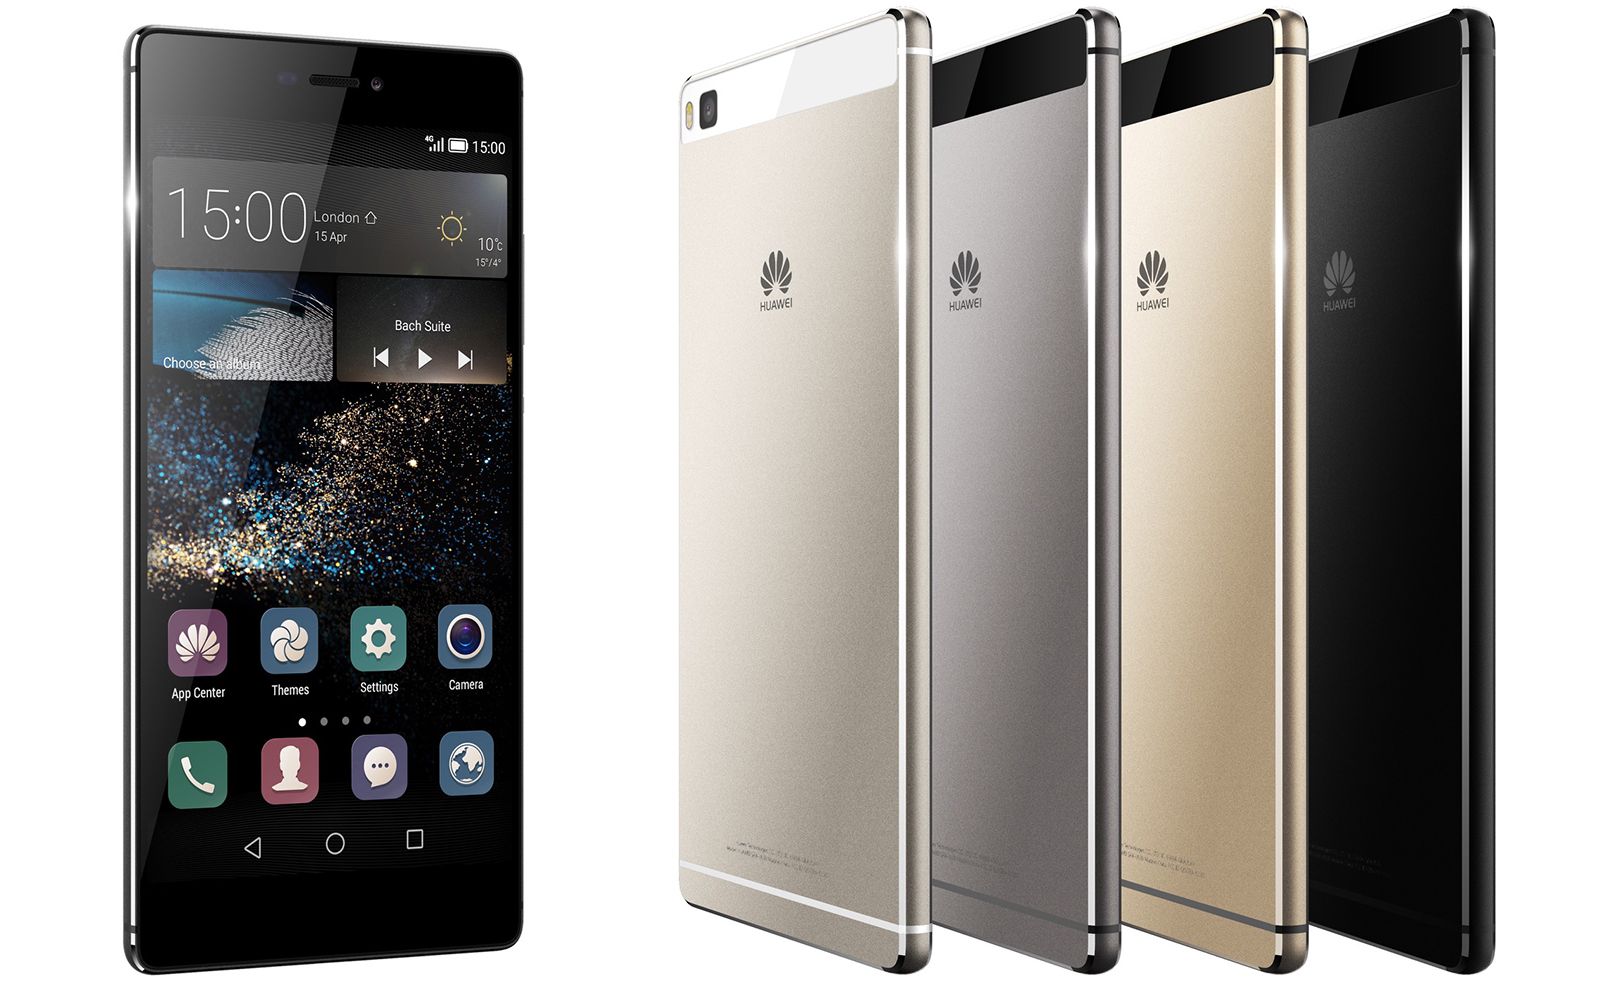 huawei p8 is here 5 2 inch full hd screen octa core cpu and just 6 4mm thick image 1